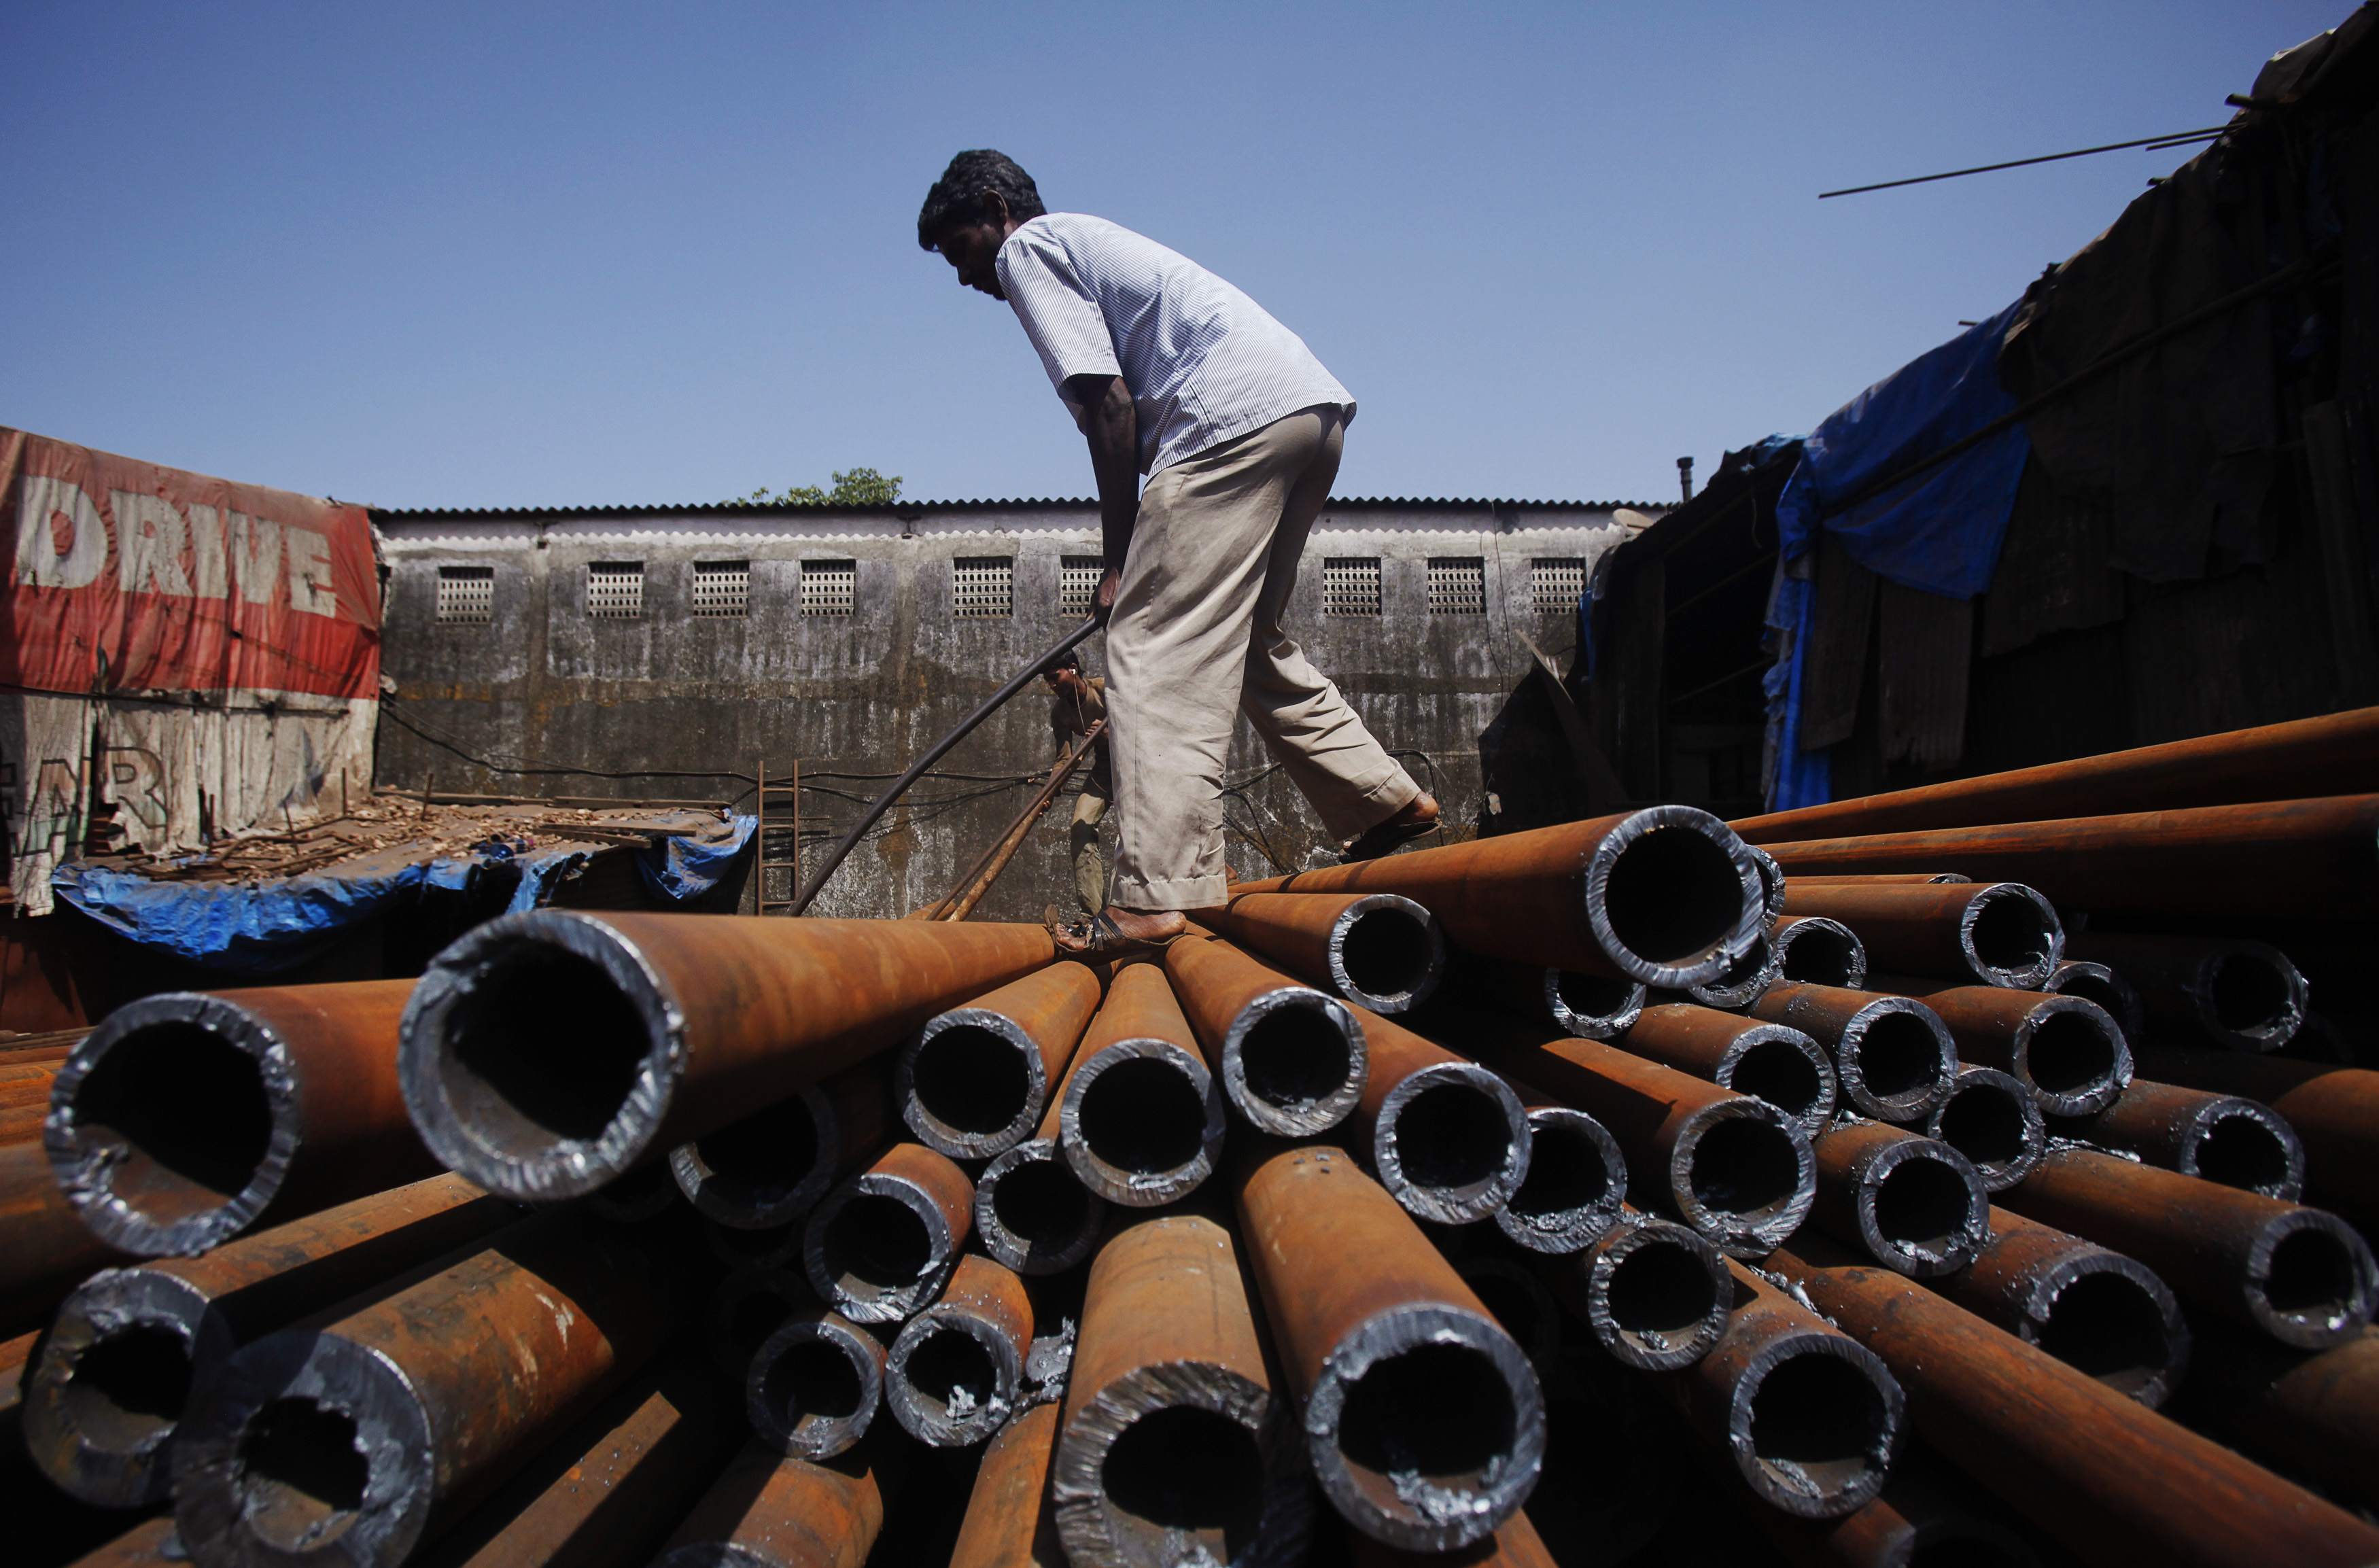 A worker moves iron pipes after unloading them at a factory in an industrial area in Mumbai